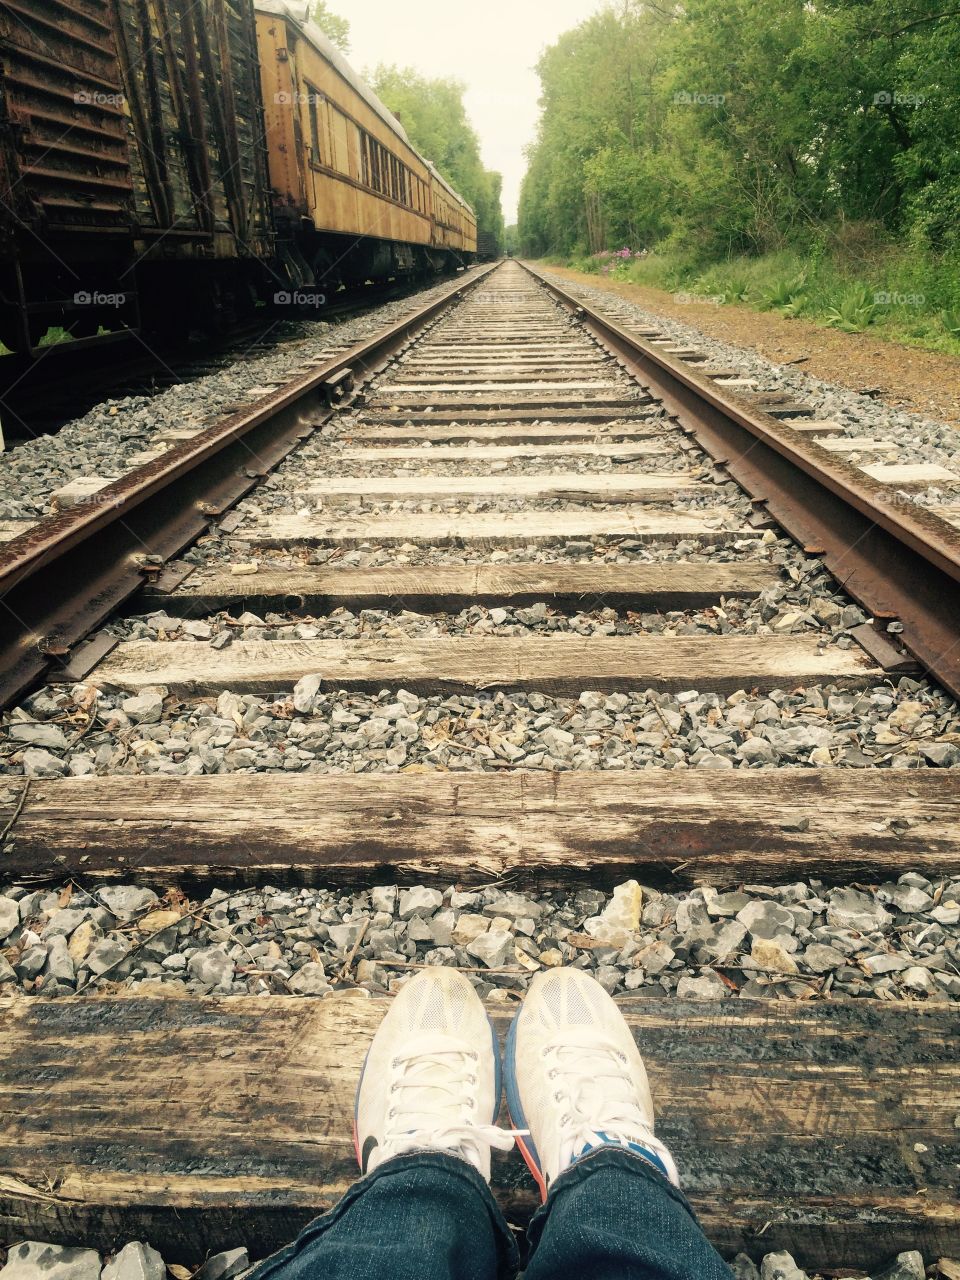 What better place to think then the silent tracks 